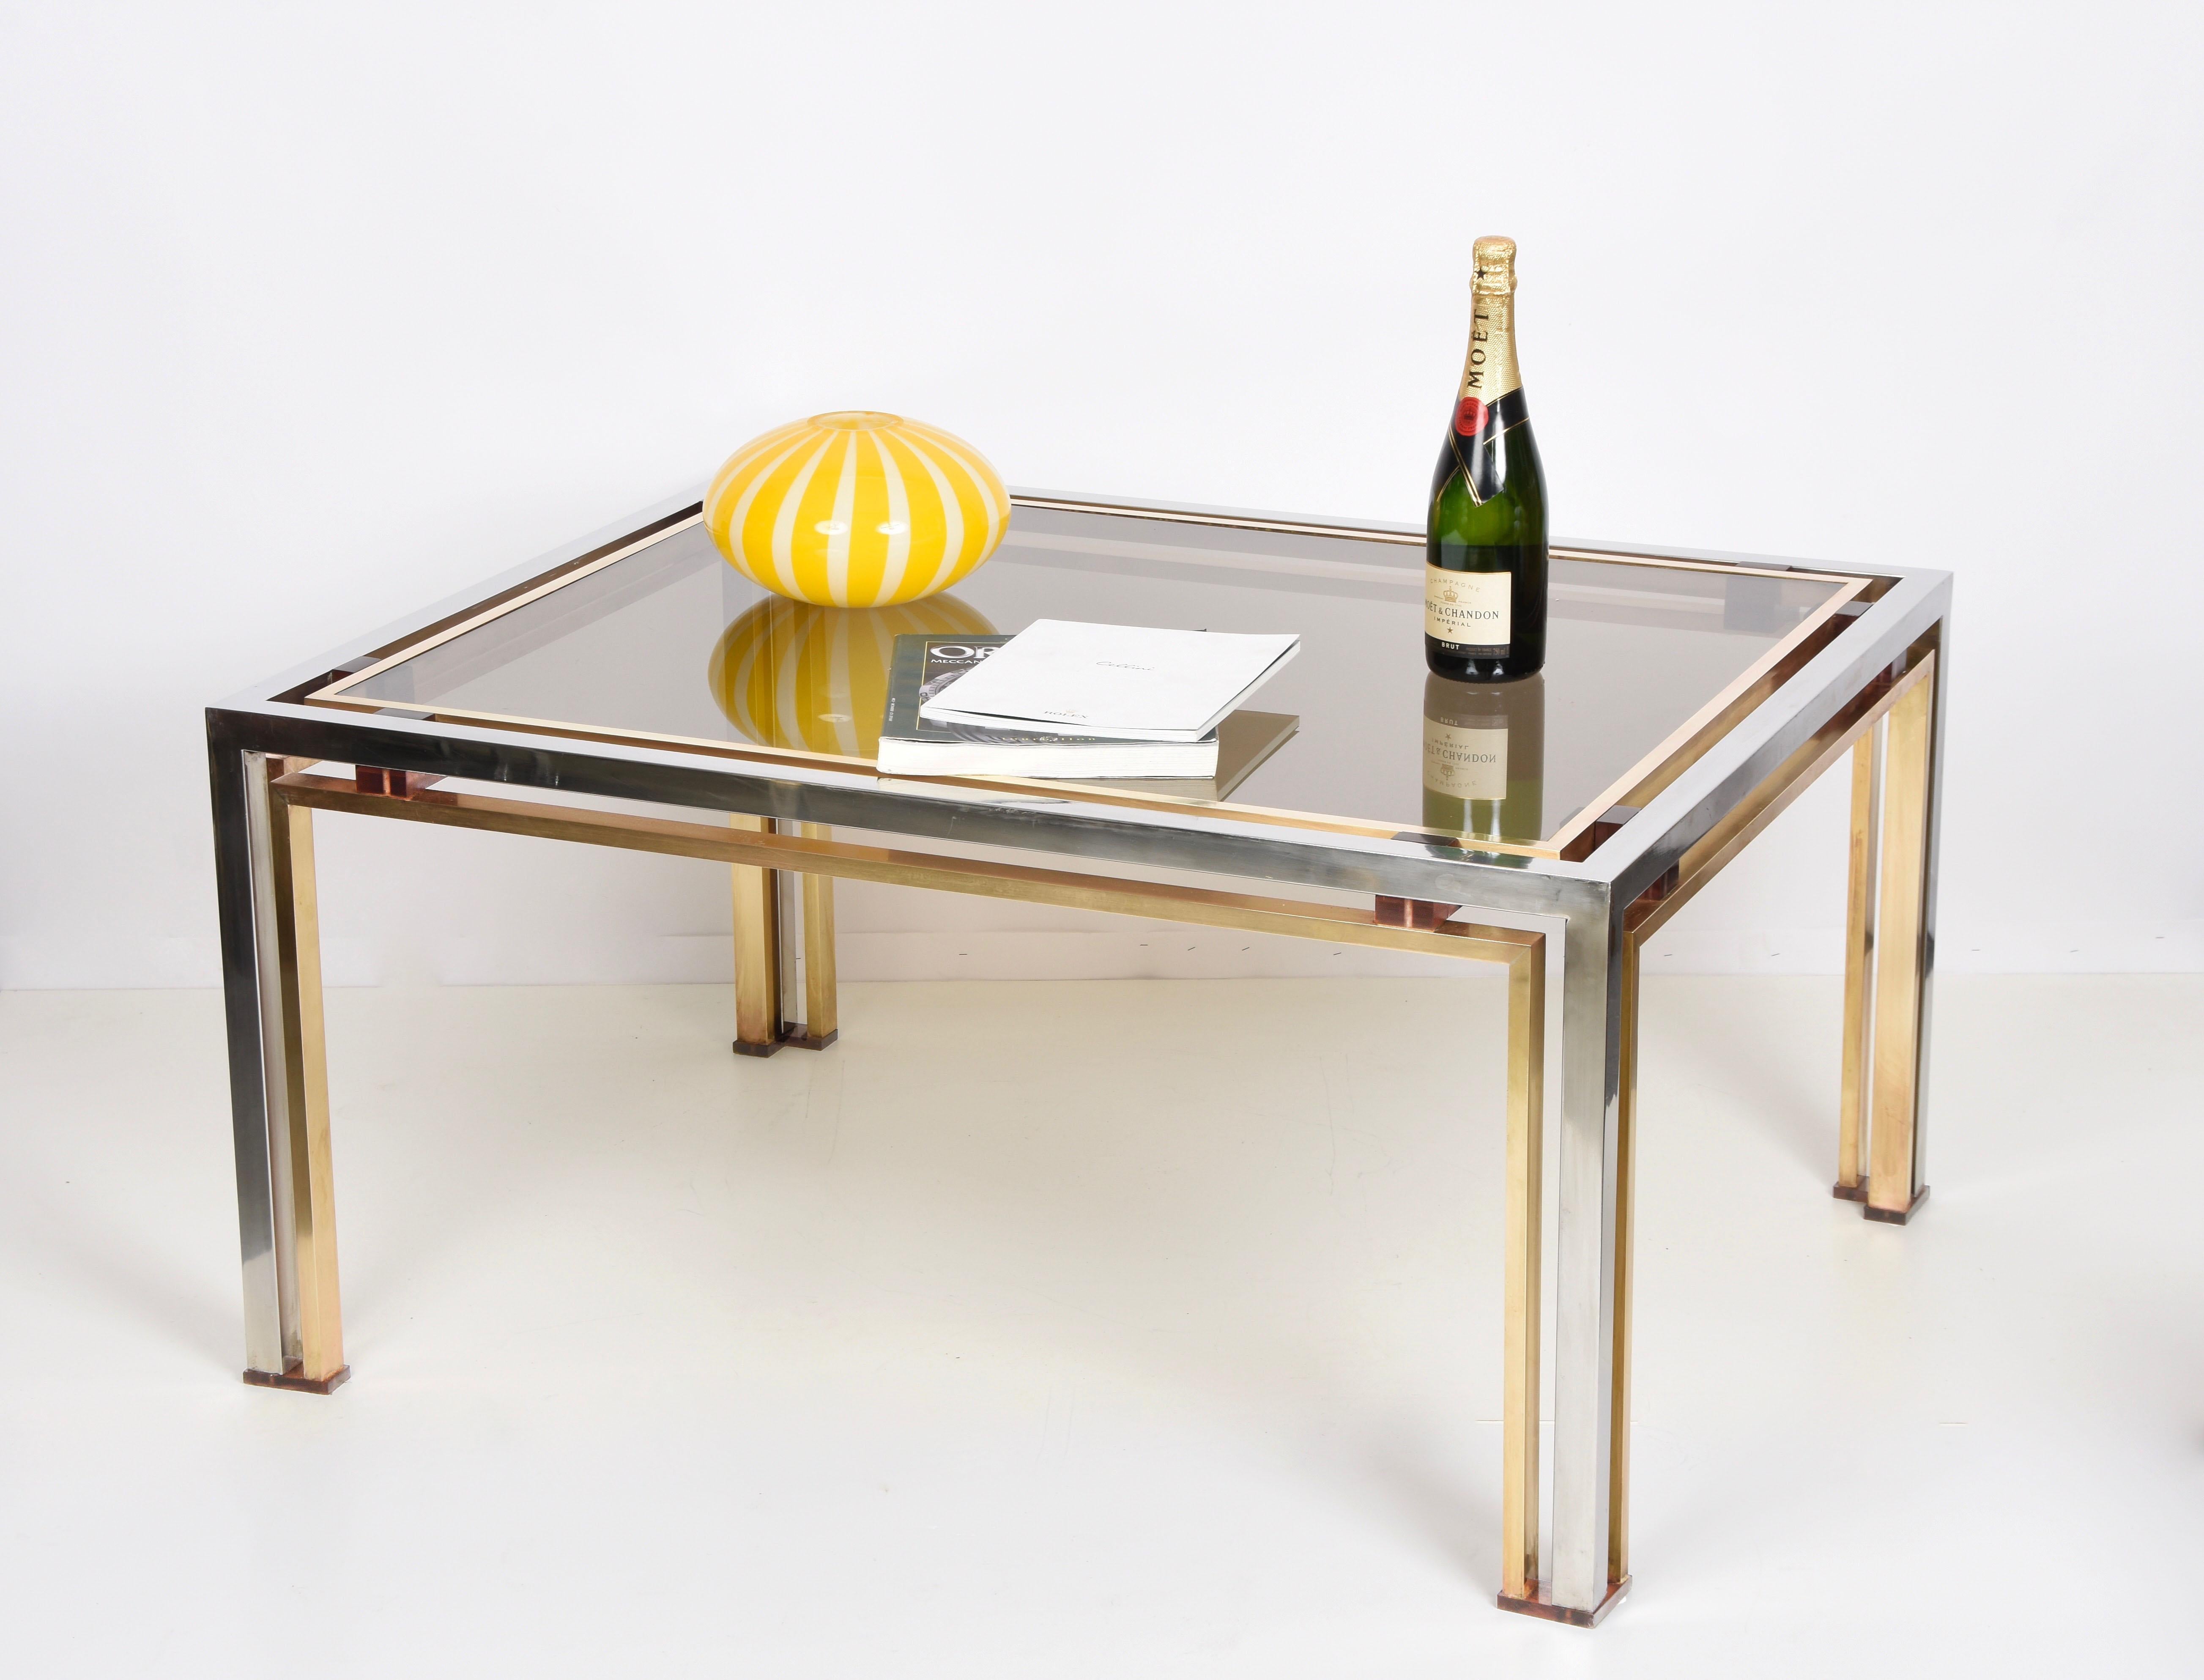 Romeo Rega Italian Coffee Table in Brass and Chrome Smoked Glass Lucite 1970s For Sale 7